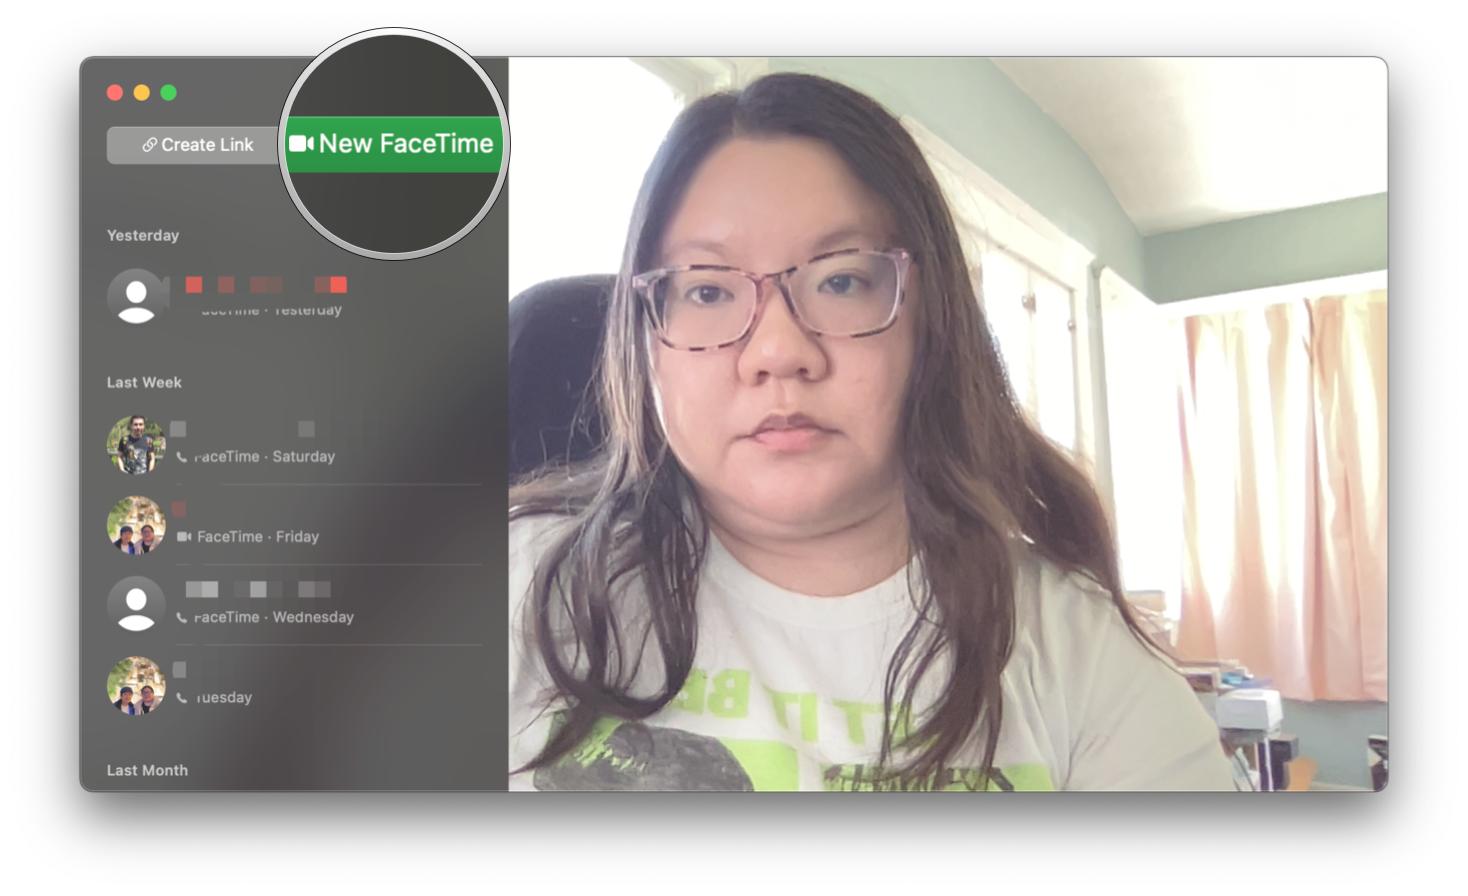 Make a FaceTime call in Monterey: Launch FaceTime, click New FaceTime